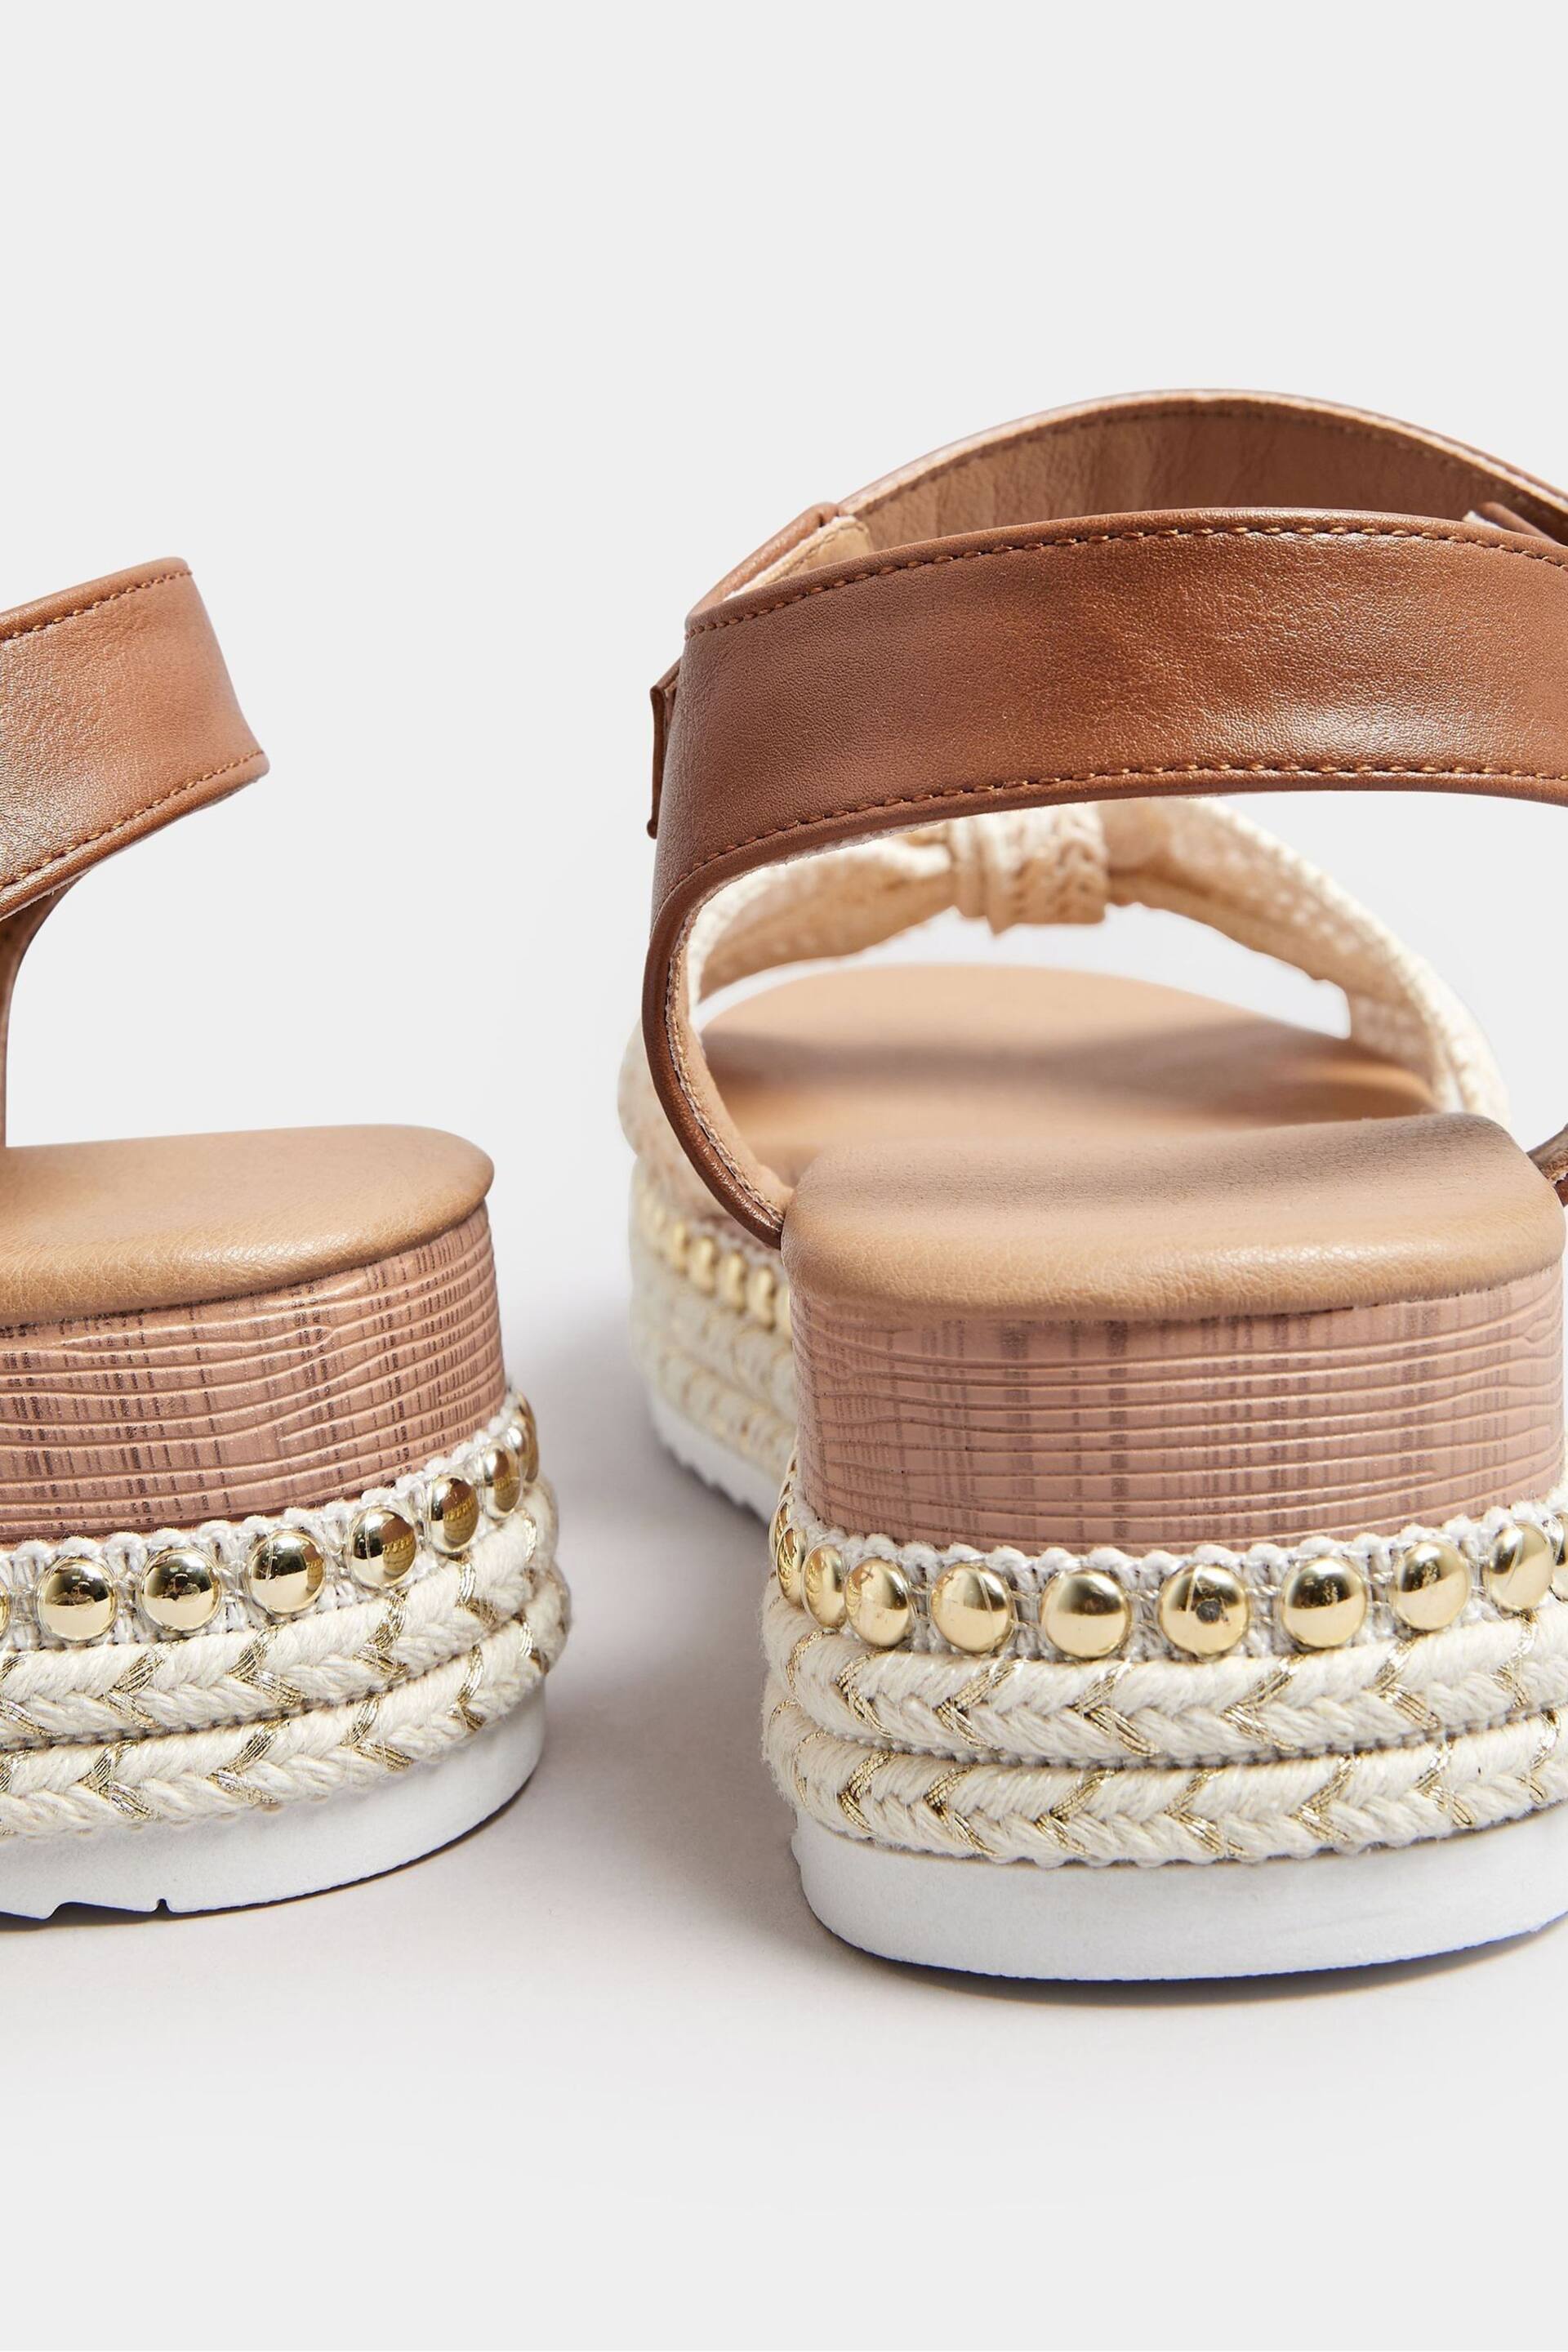 Yours Curve Natural Extra-Wide Fit Two Part Espadrilles - Image 4 of 5